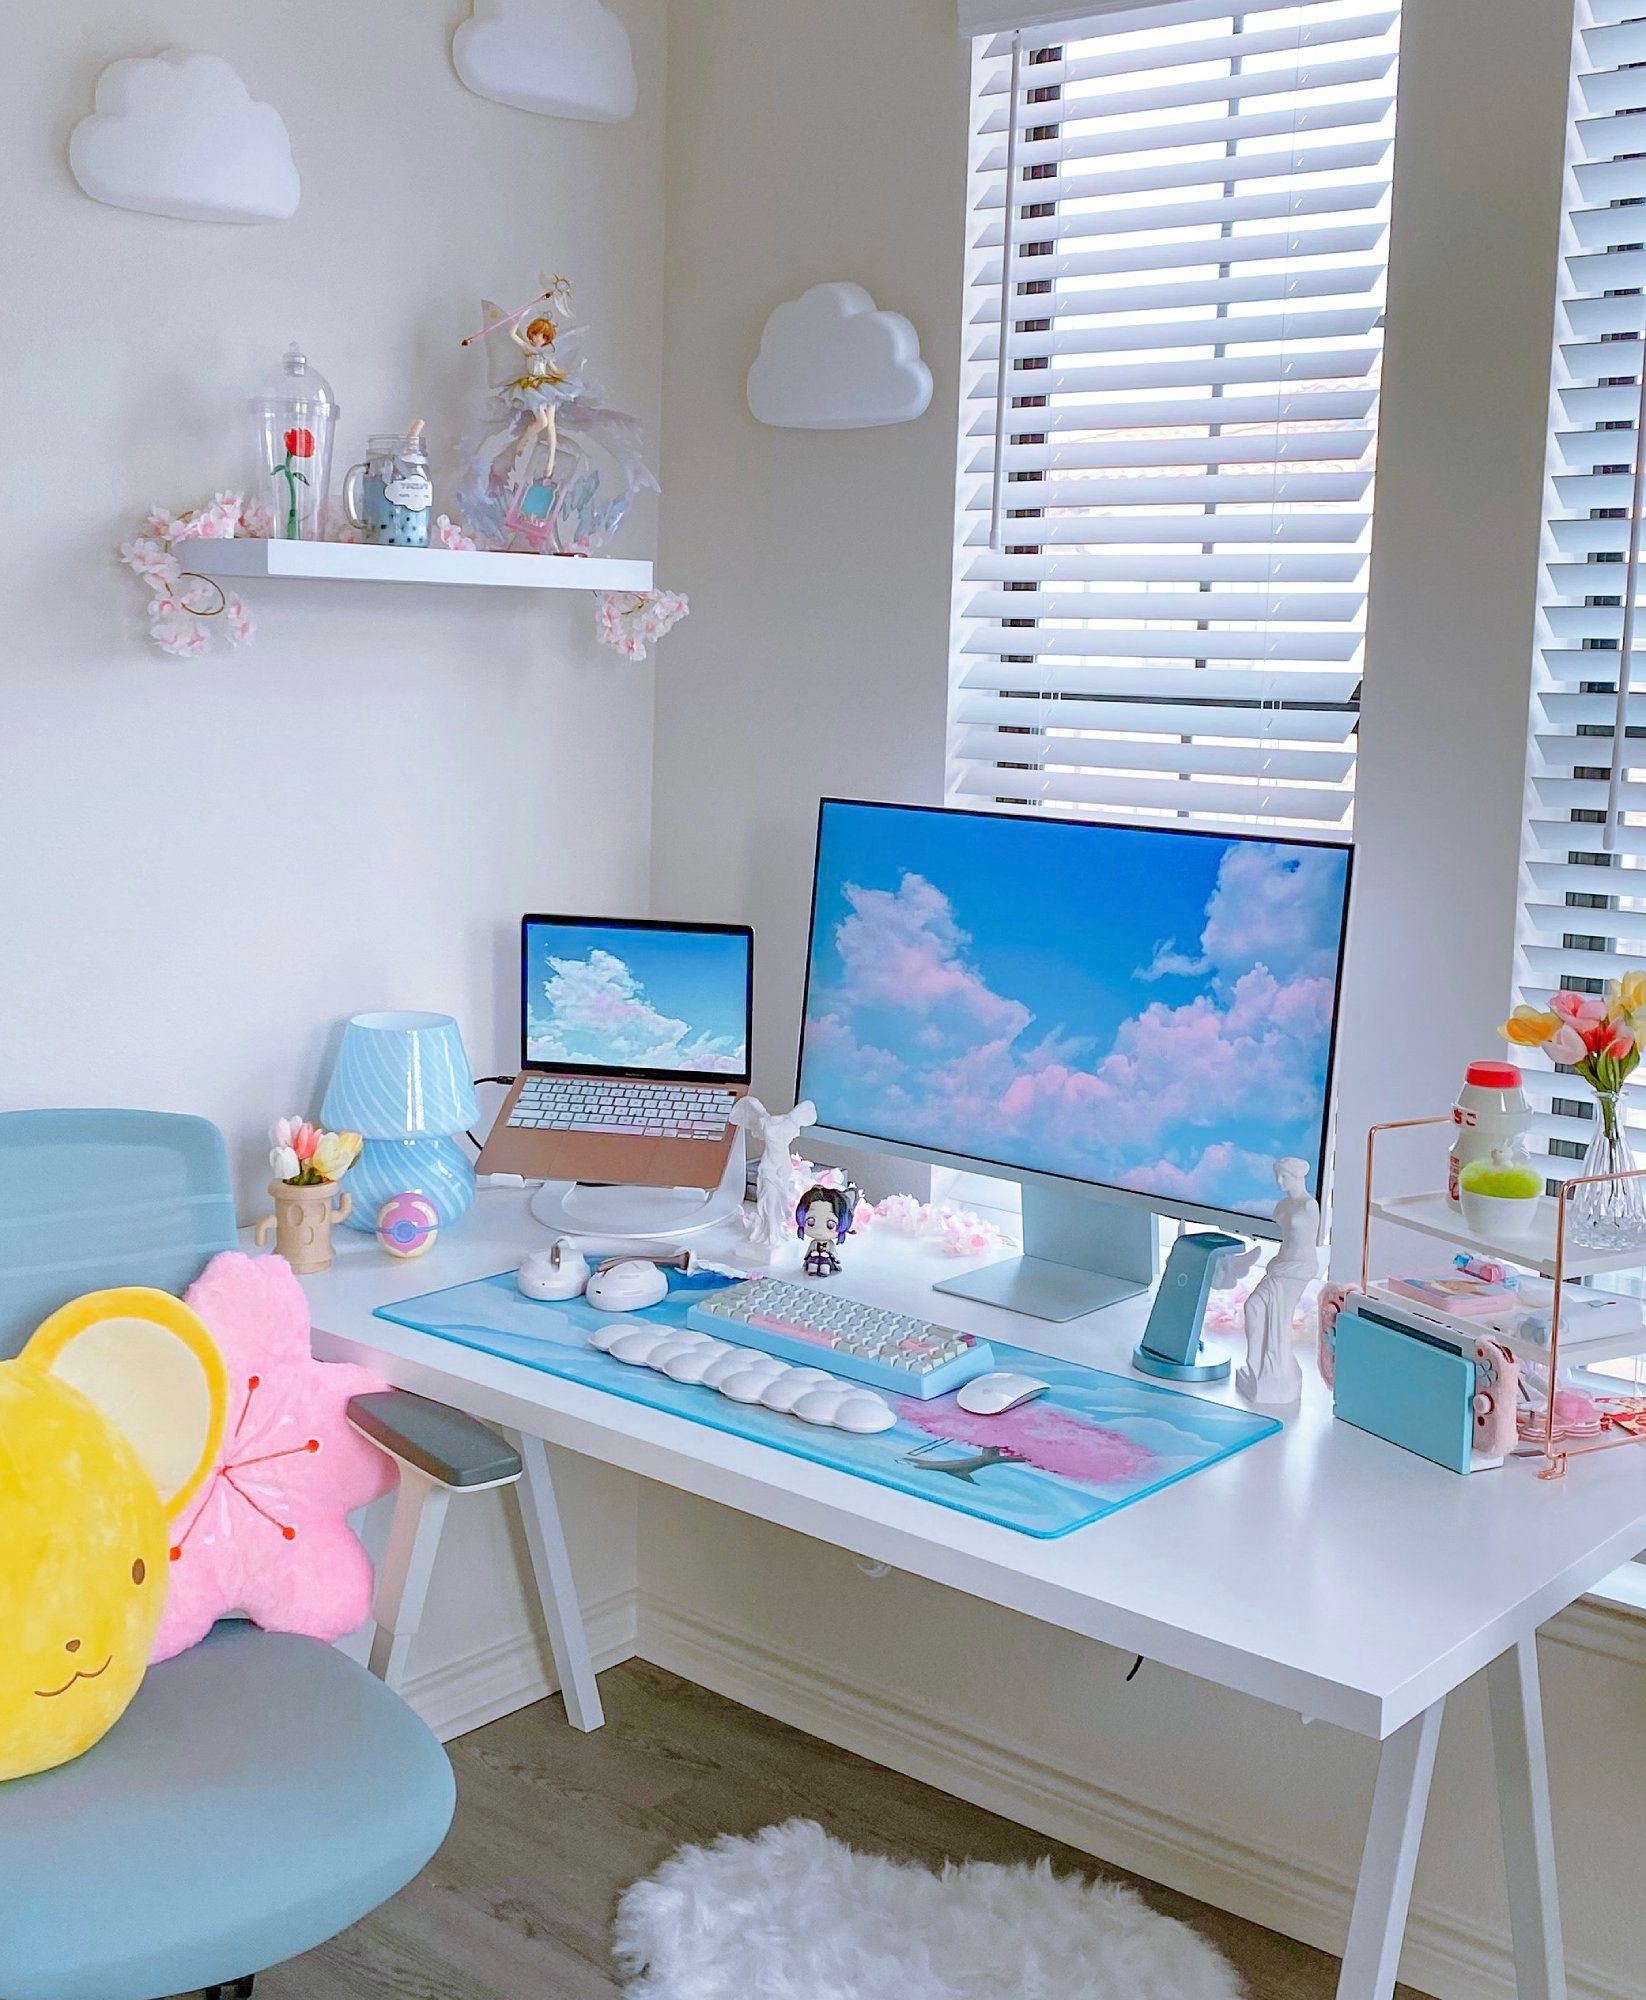 A cute battlestation setup in a small room with a window